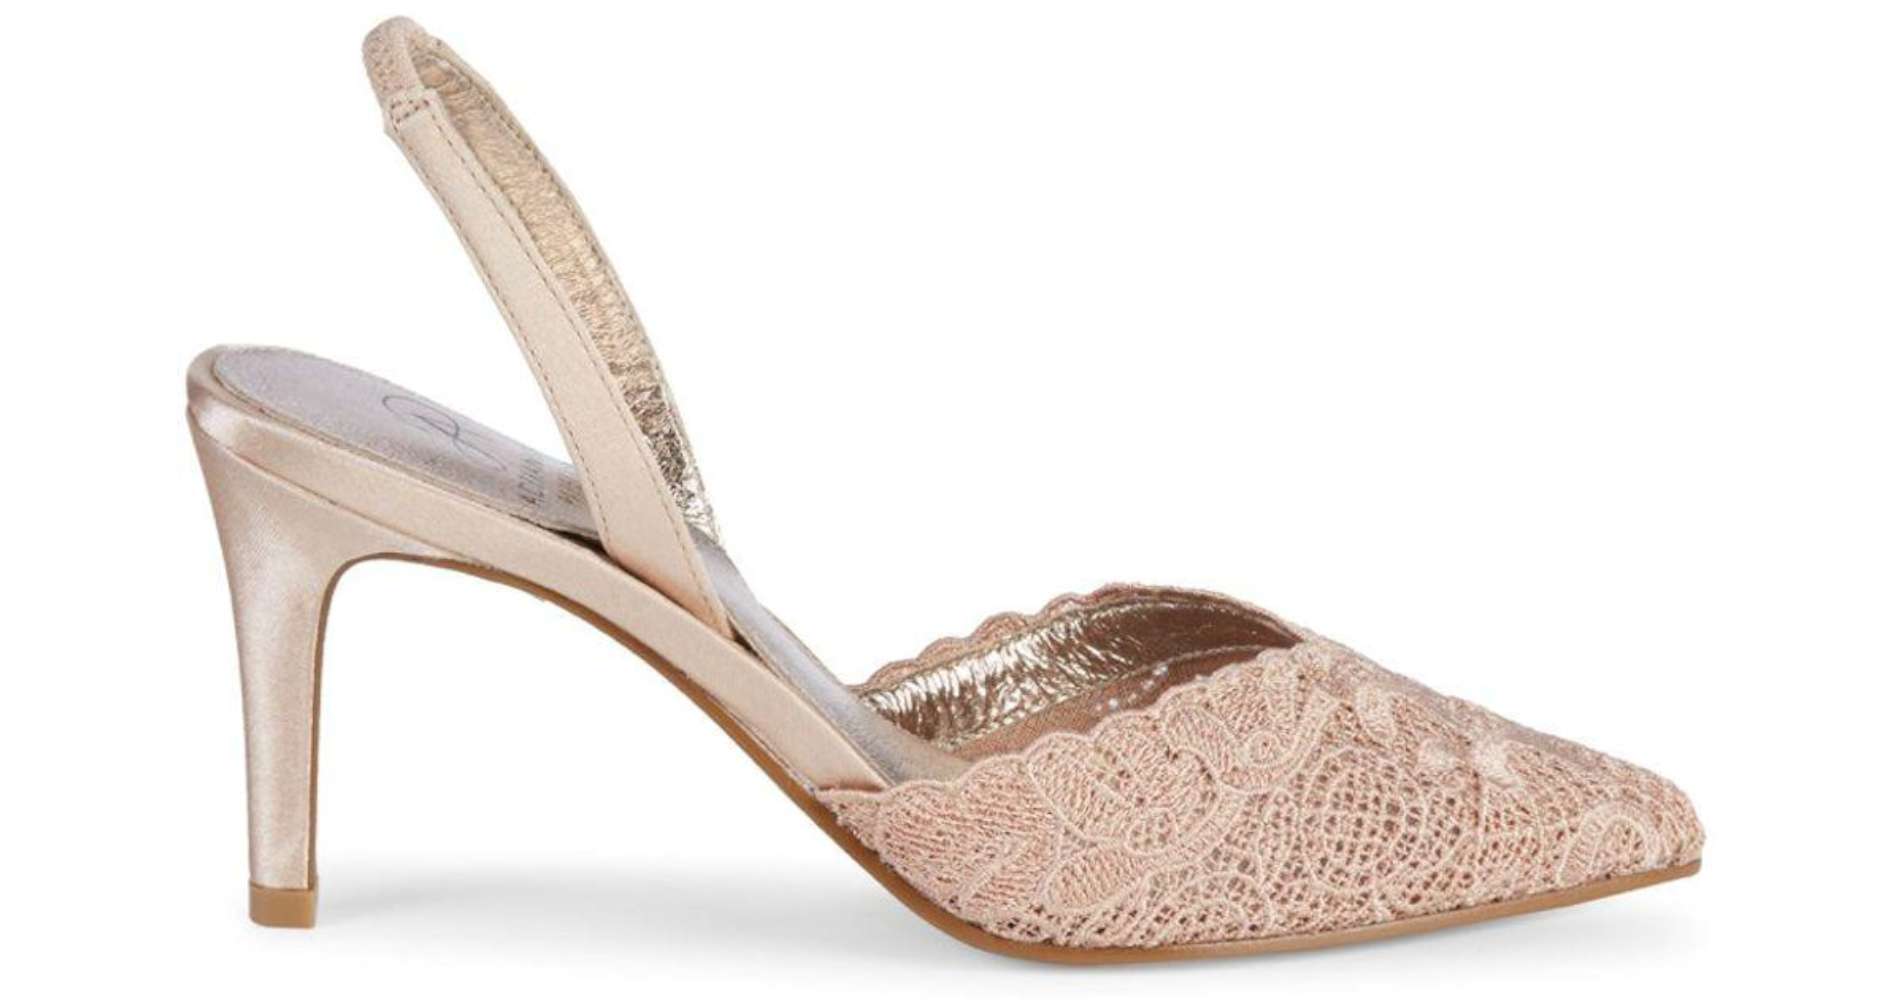 Adrianna Papell Women's Shoes Hallie Fabric Pointed Toe Special, Blush, Size 8.5 - image 3 of 3